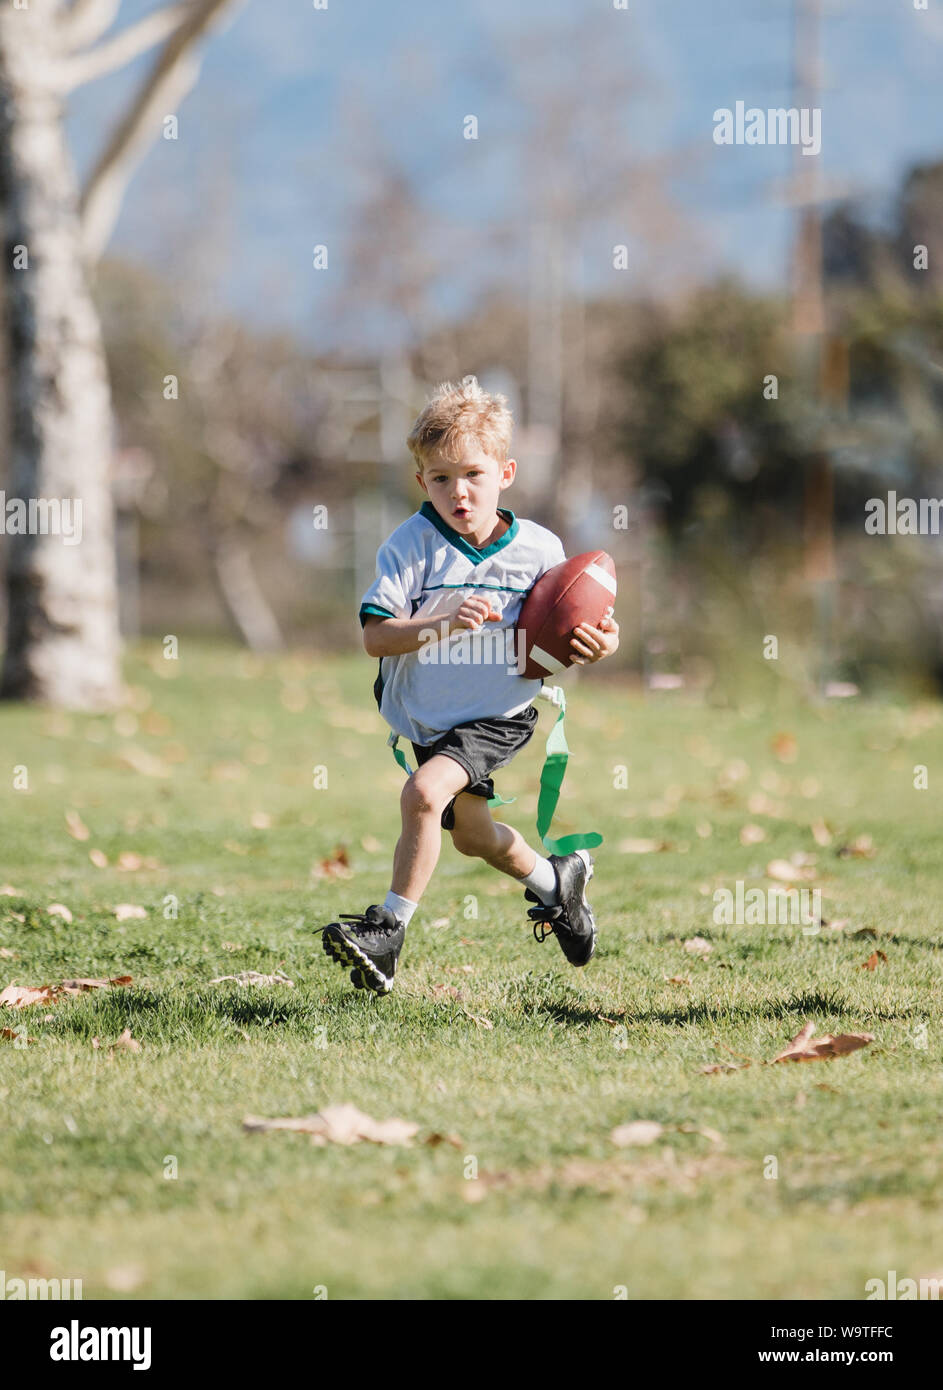 Boy playing football drapeau, California, United States Banque D'Images